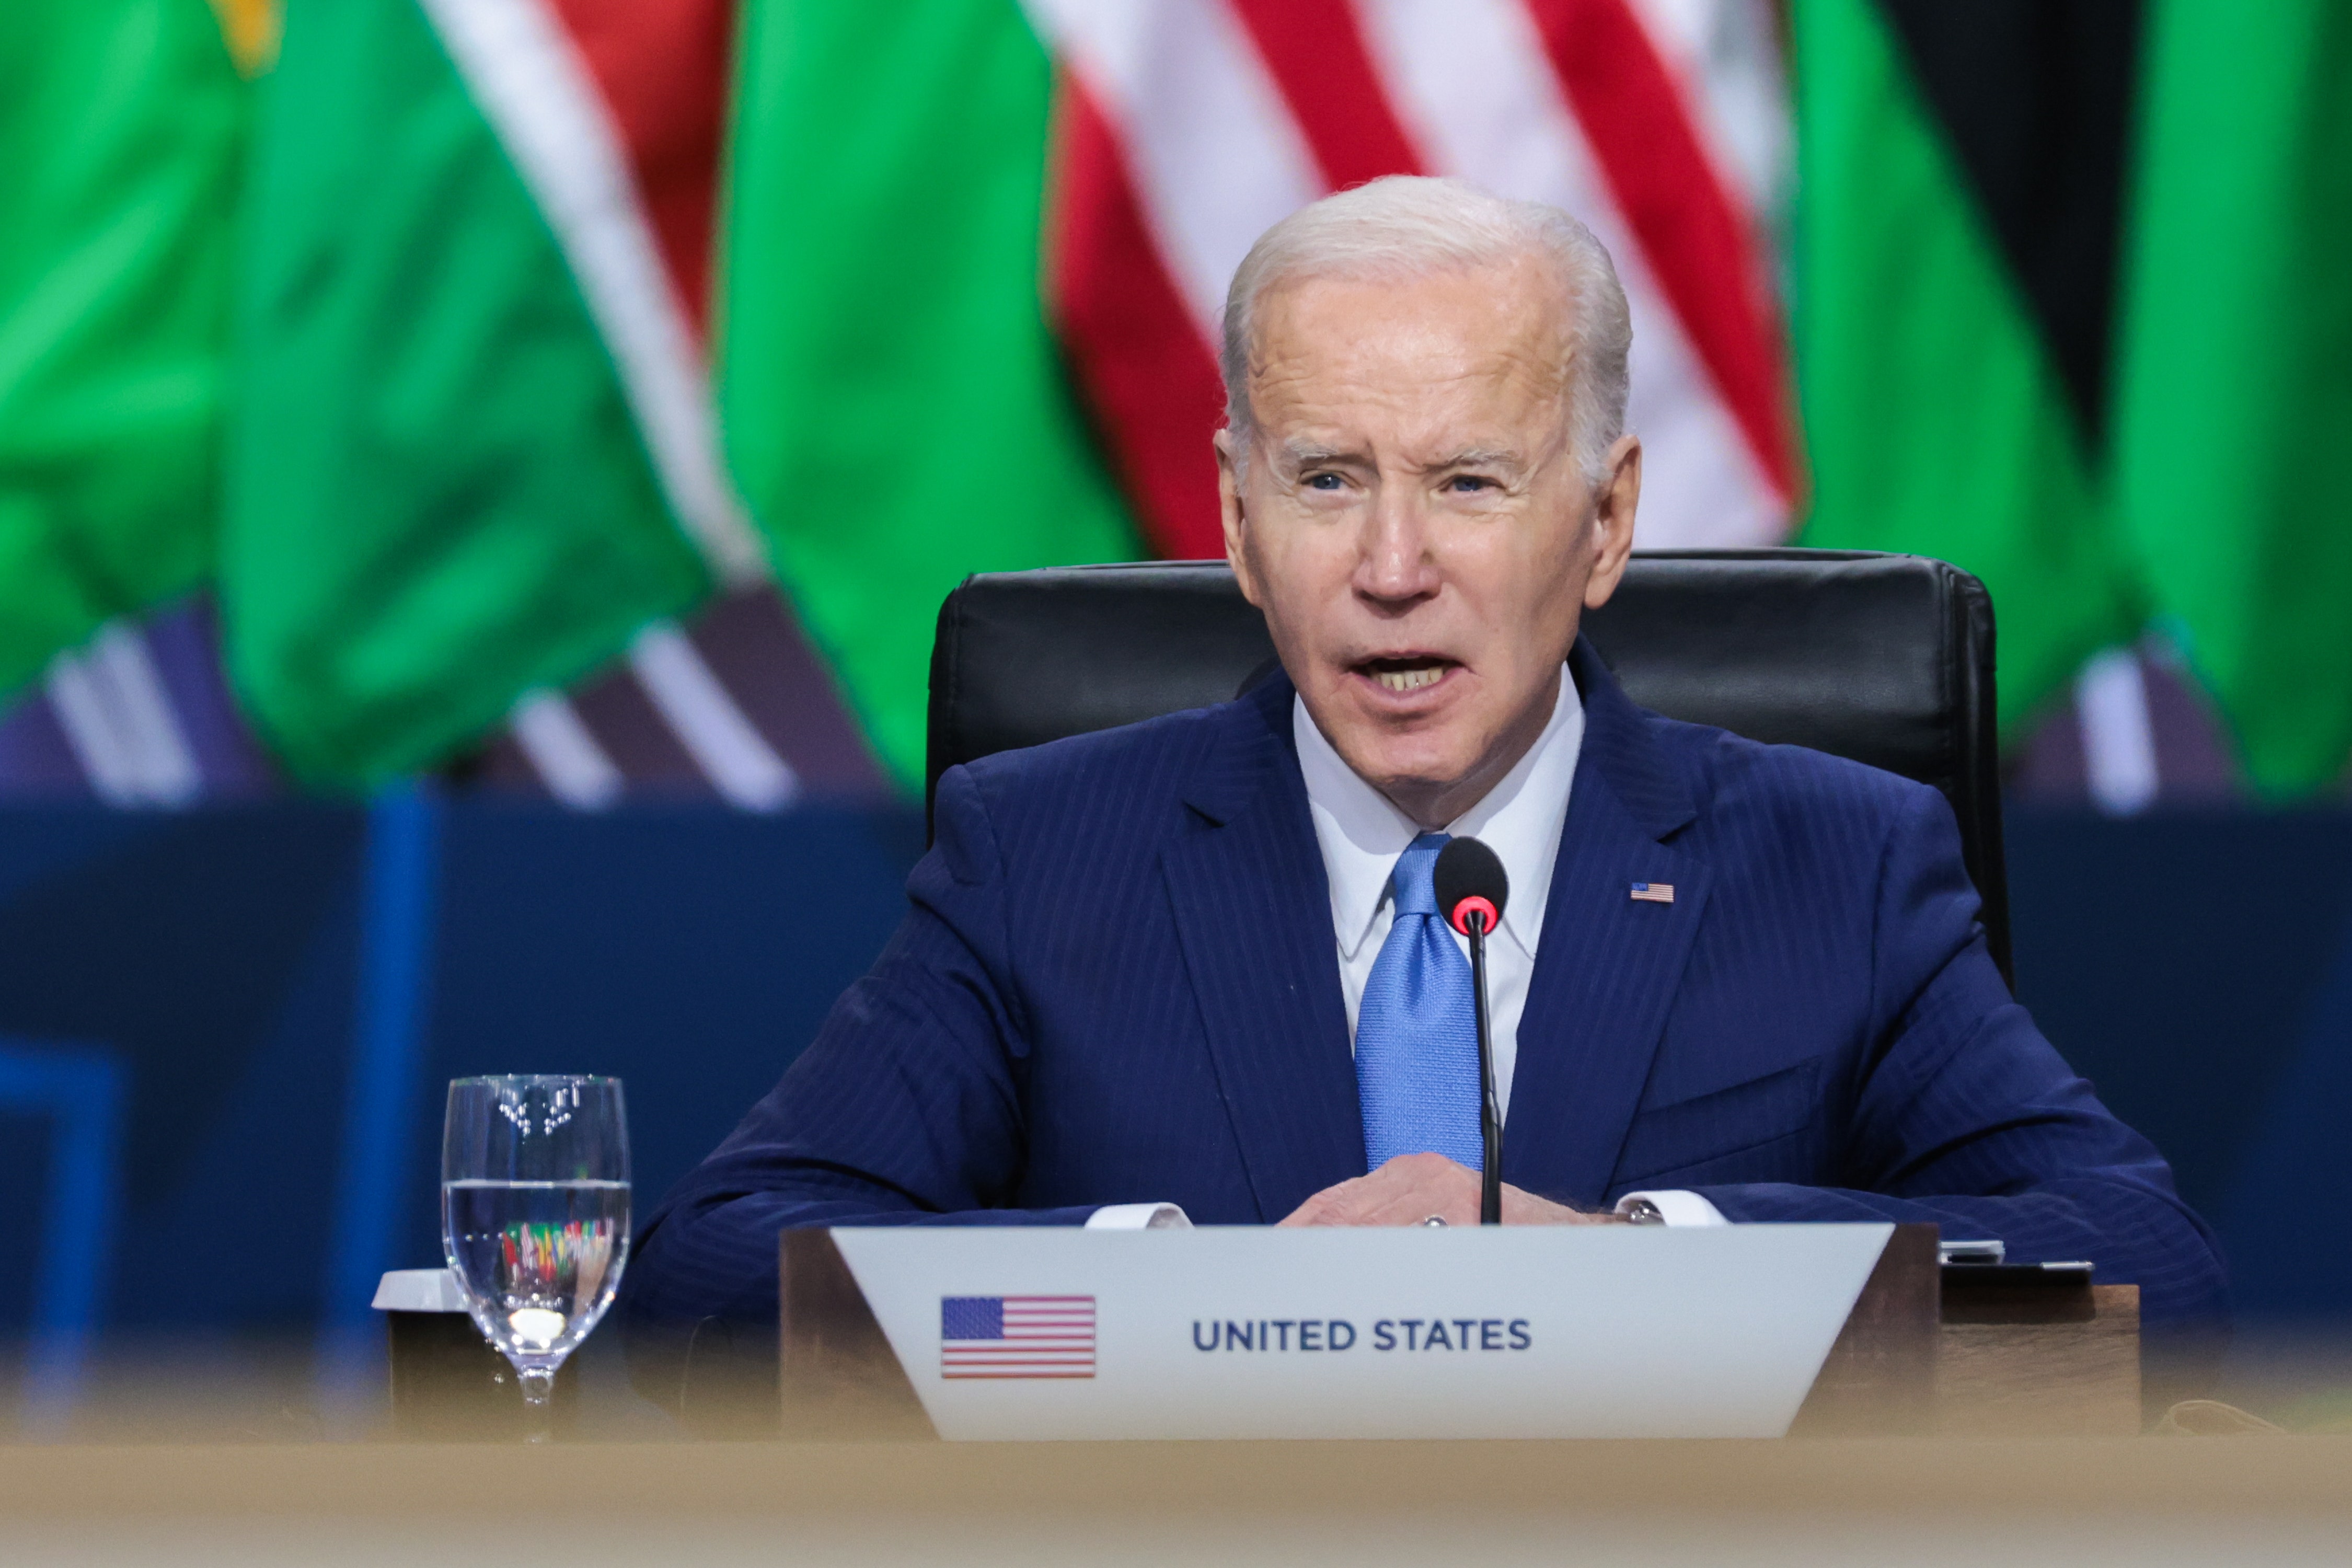 Biden's midterm report card: Americans grade him on economy, immigration, foreign relations and climate change